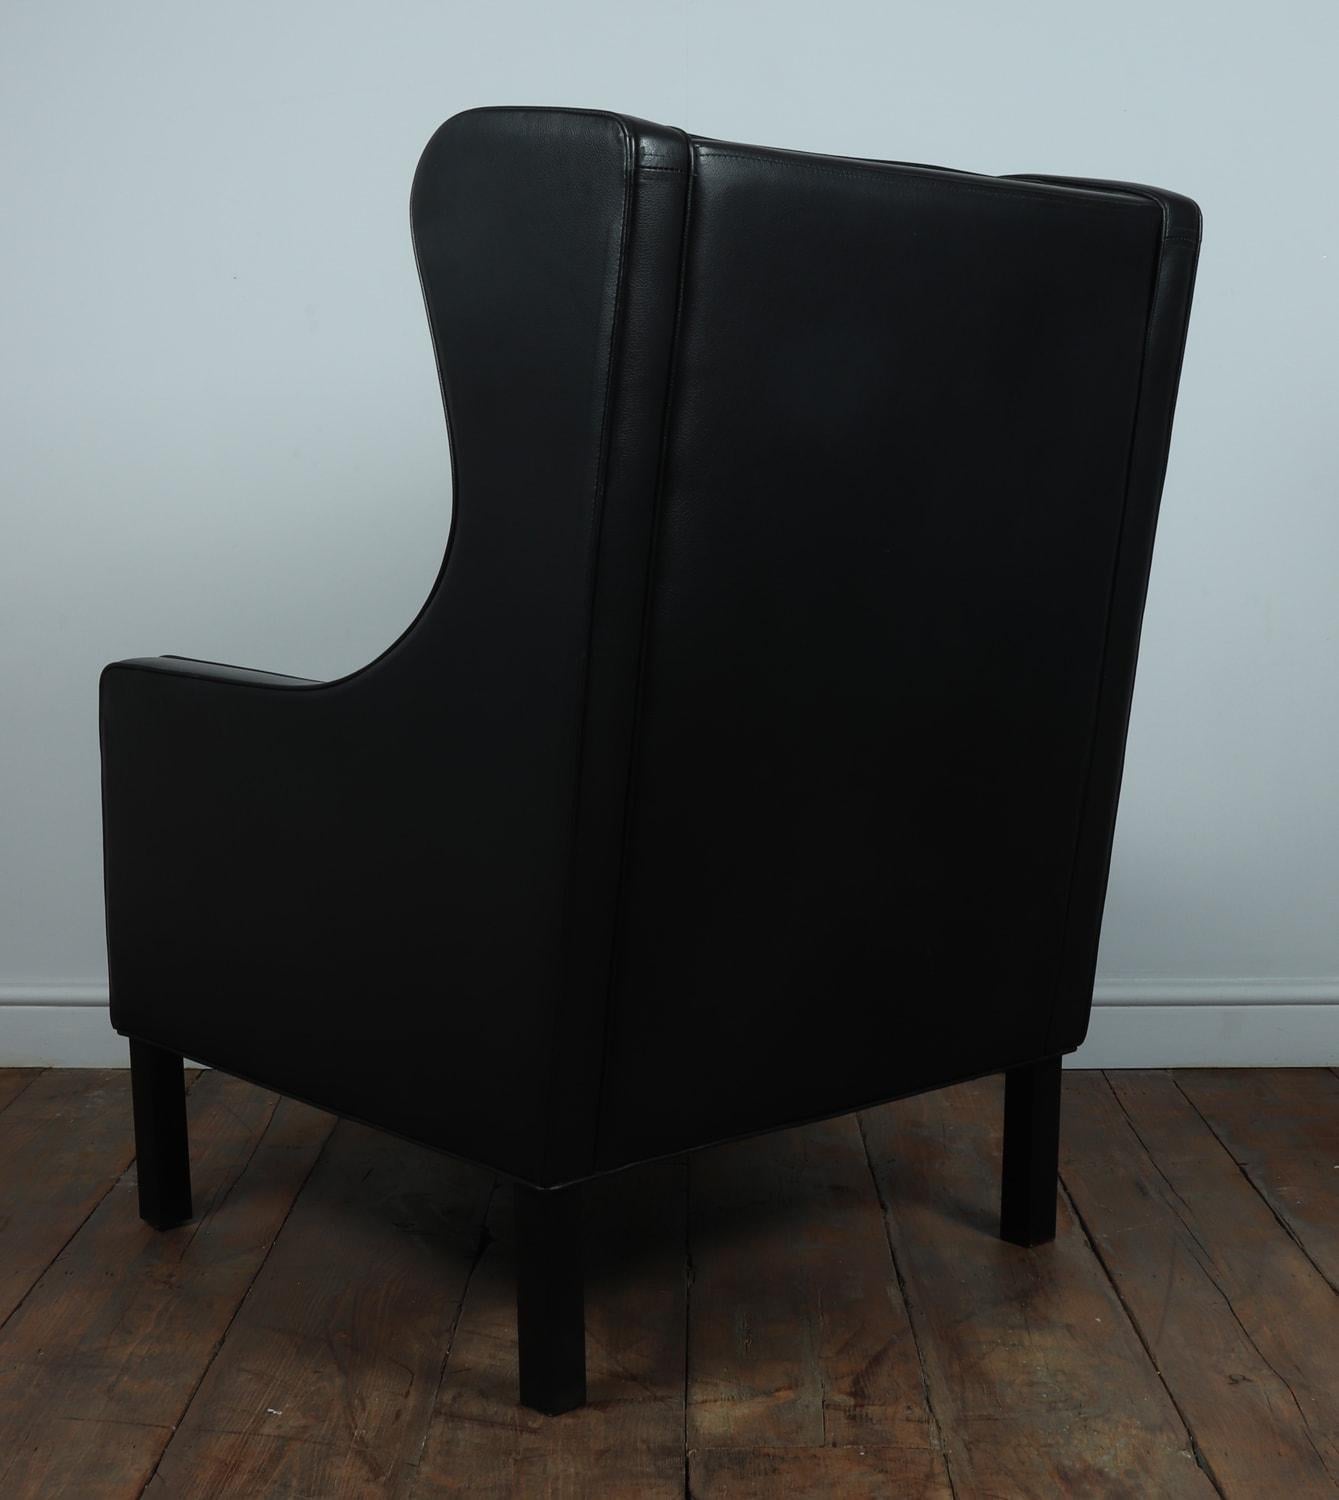 Danish, Mid-Century Modern, Wing Chair in Black Leather by Hurup, circa 1980 For Sale 4